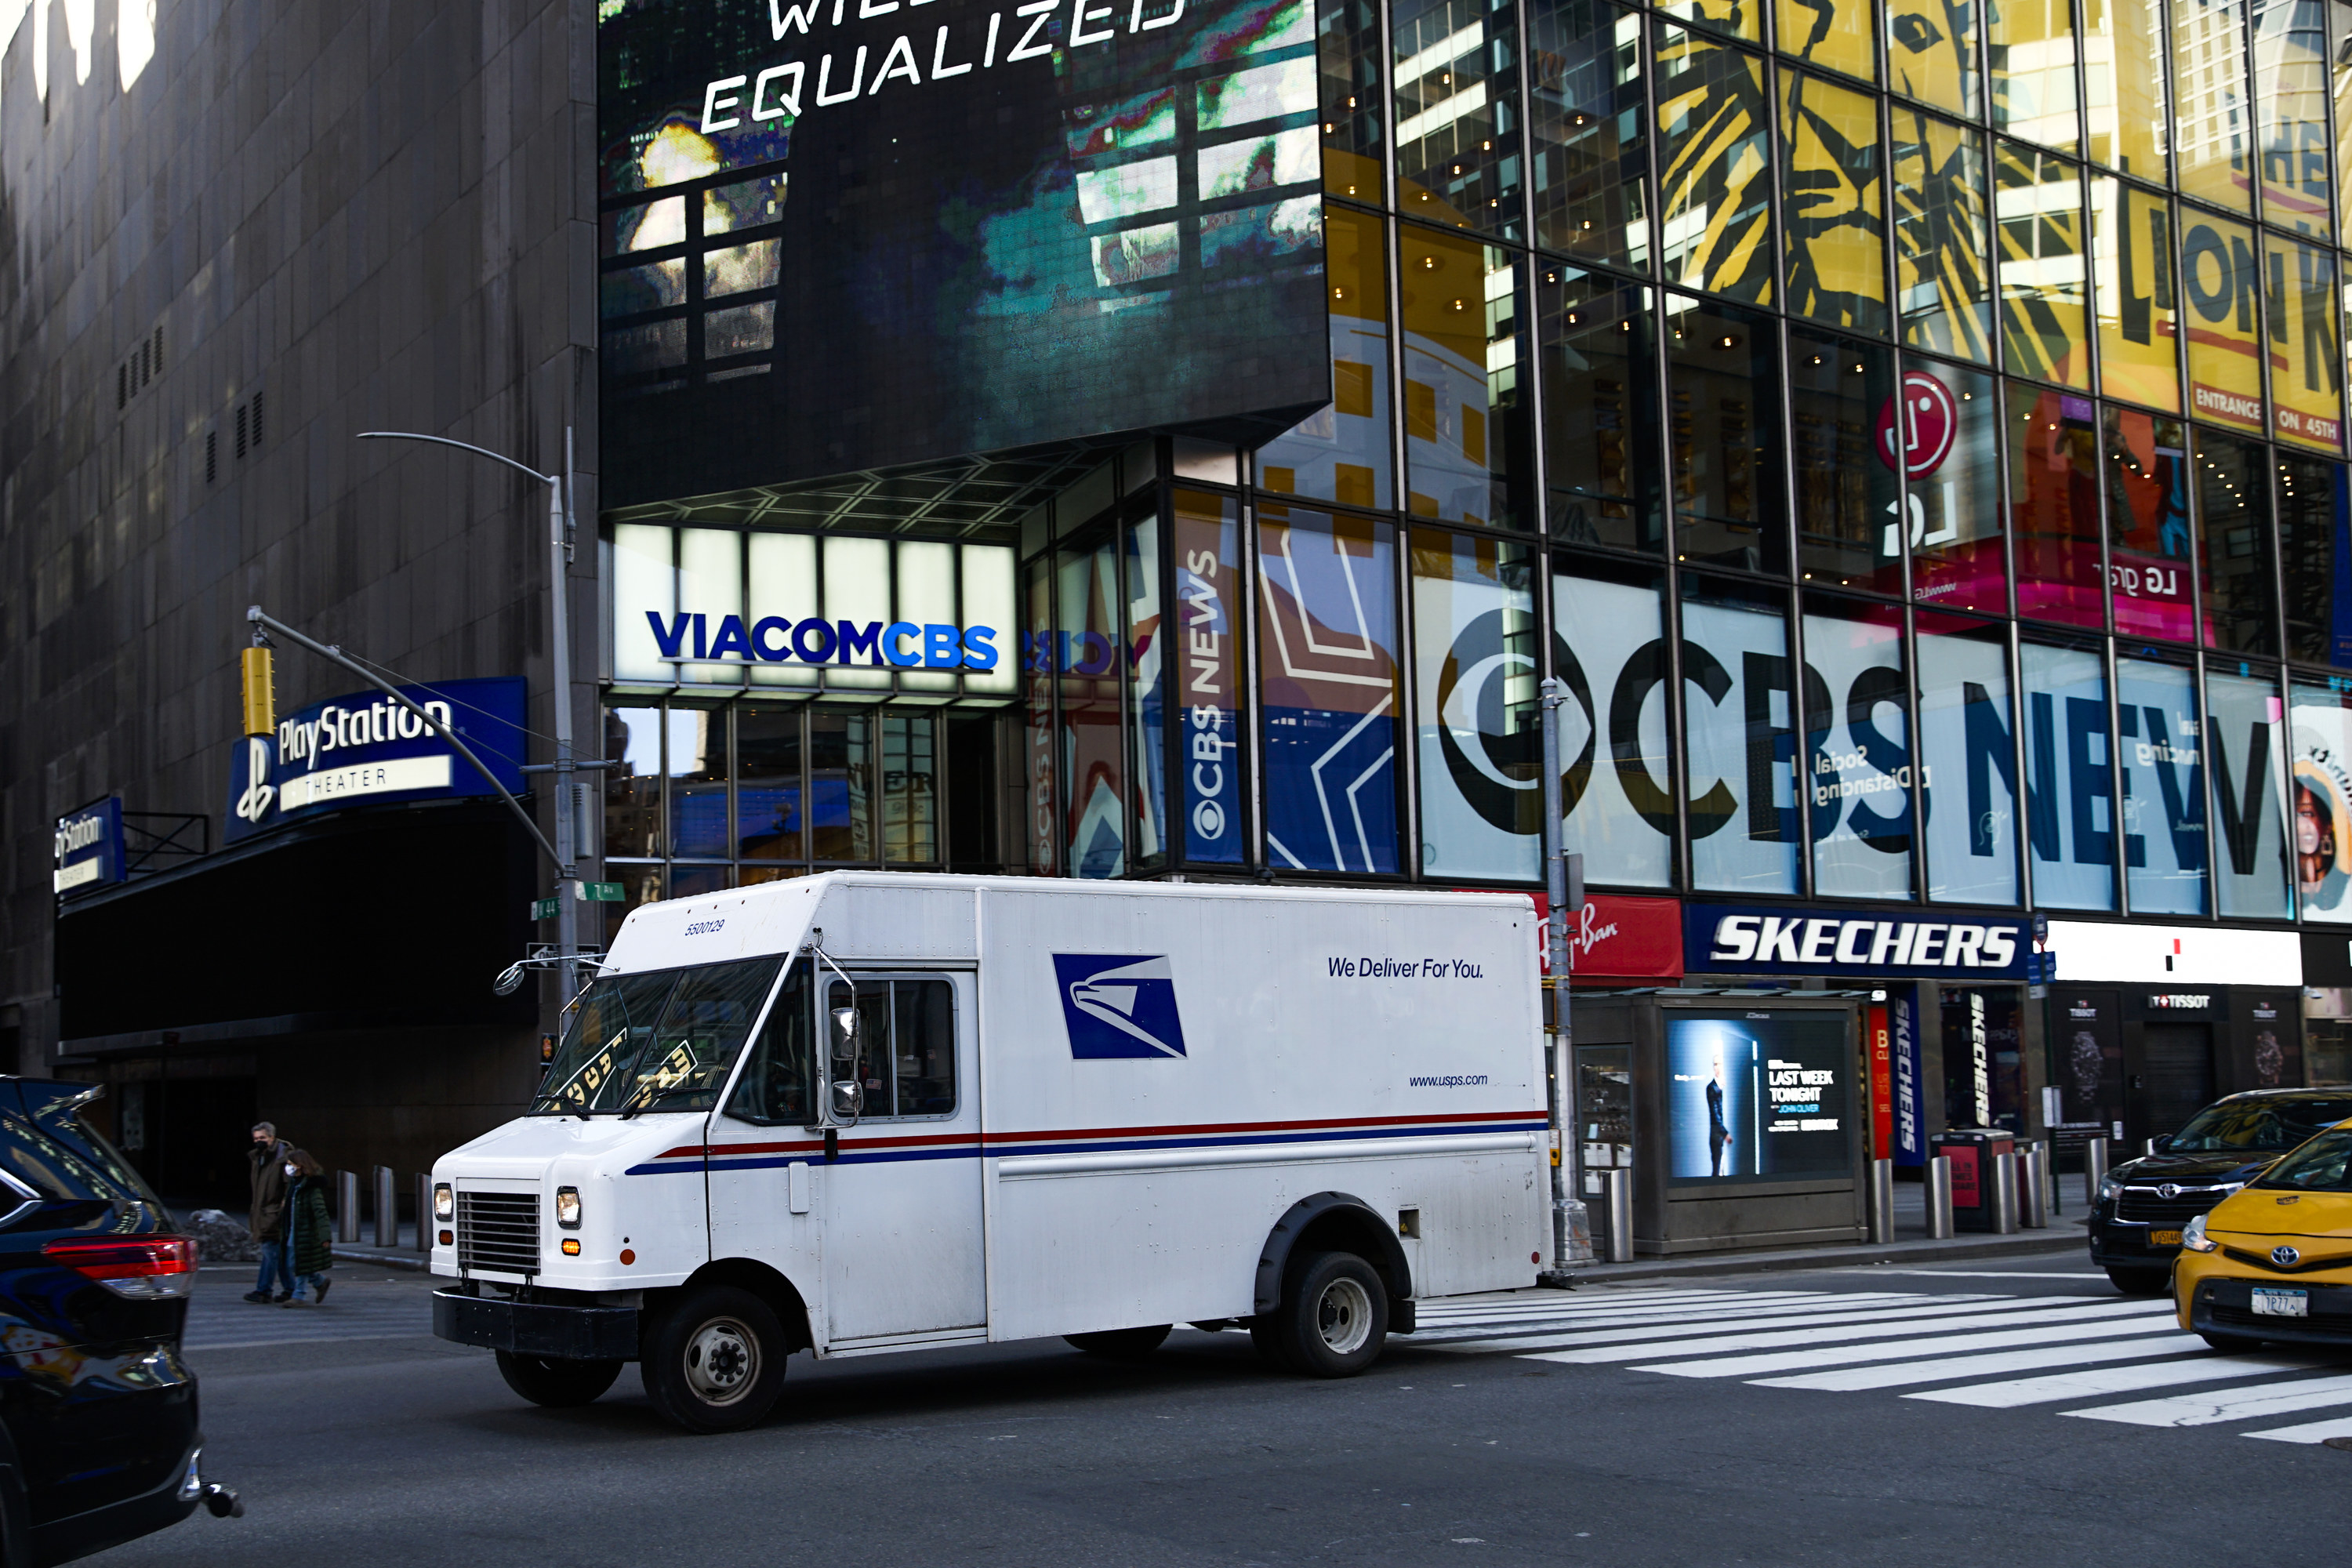 how many usps truck s in america